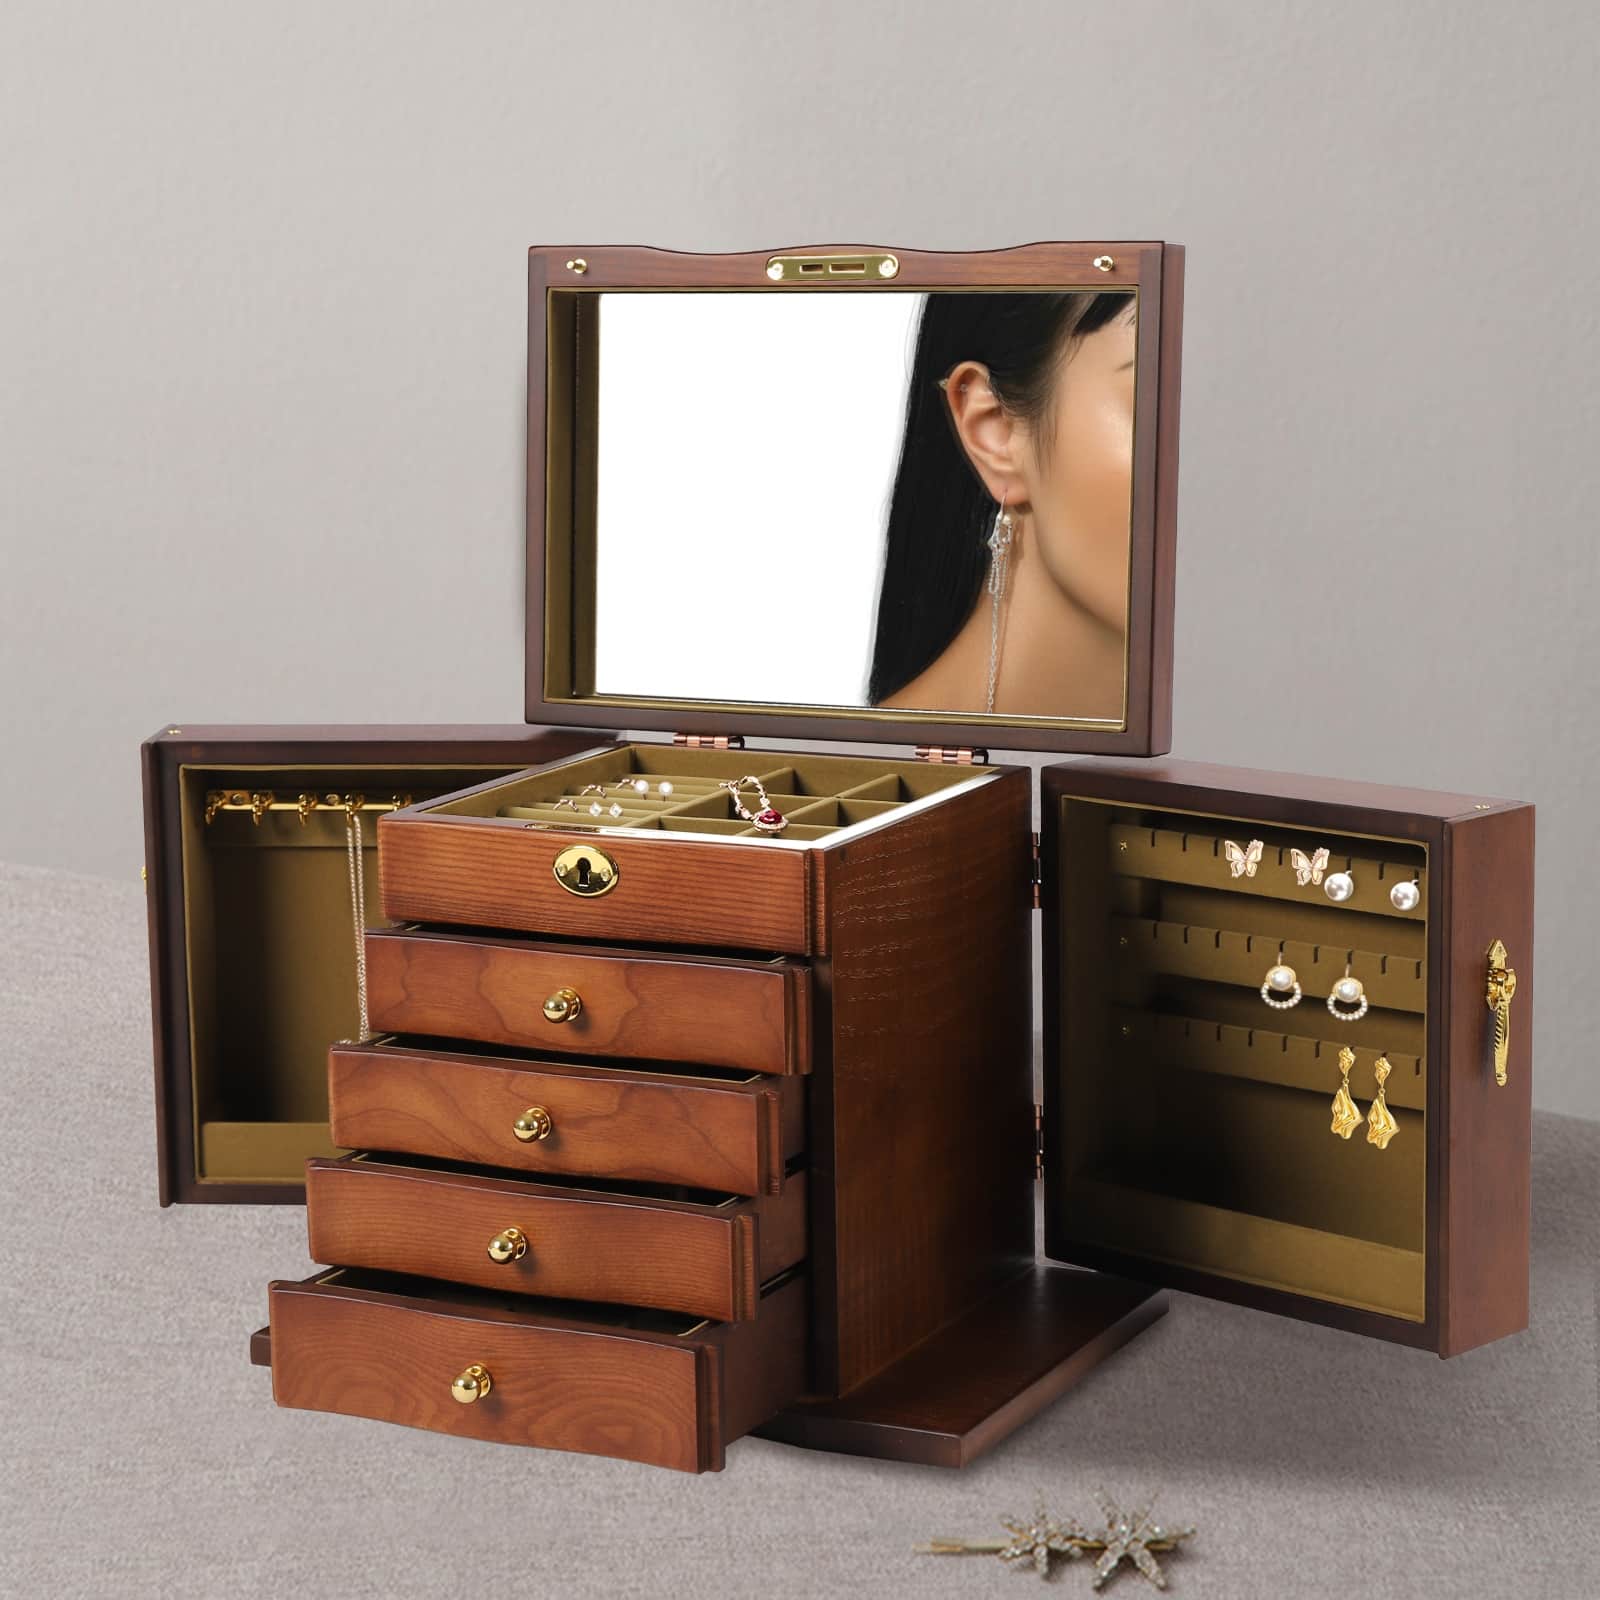 Lvet 5 Layers Portable Wooden Jewelry Storage Box with Mirror and Lock ...